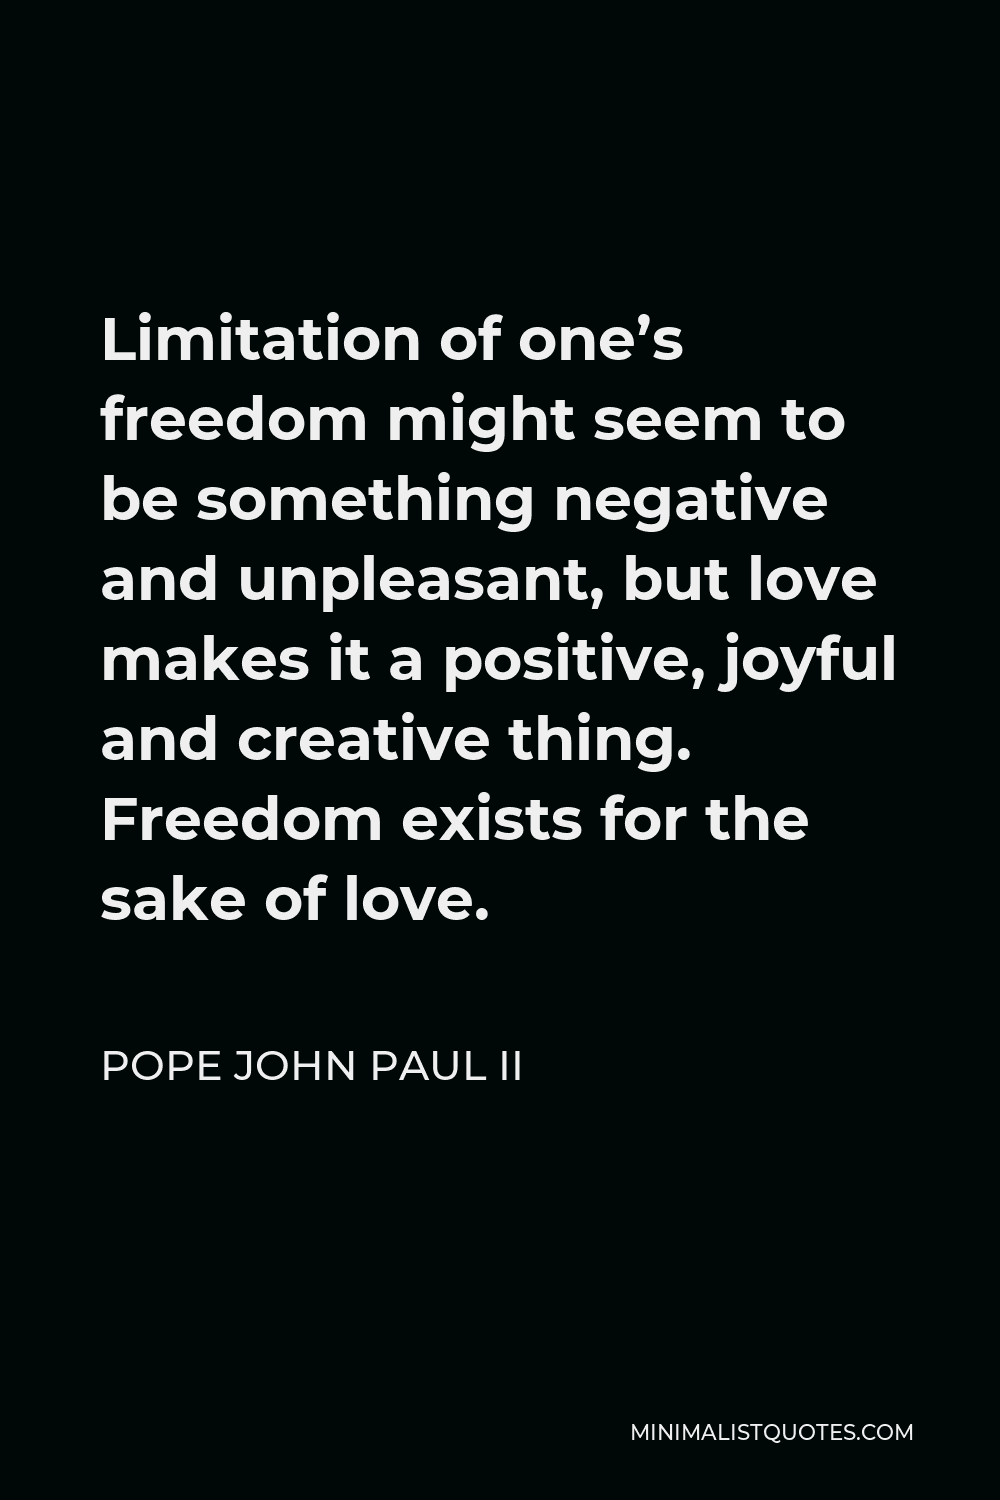 Pope John Paul II Quote - Limitation of one’s freedom might seem to be something negative and unpleasant, but love makes it a positive, joyful and creative thing. Freedom exists for the sake of love.